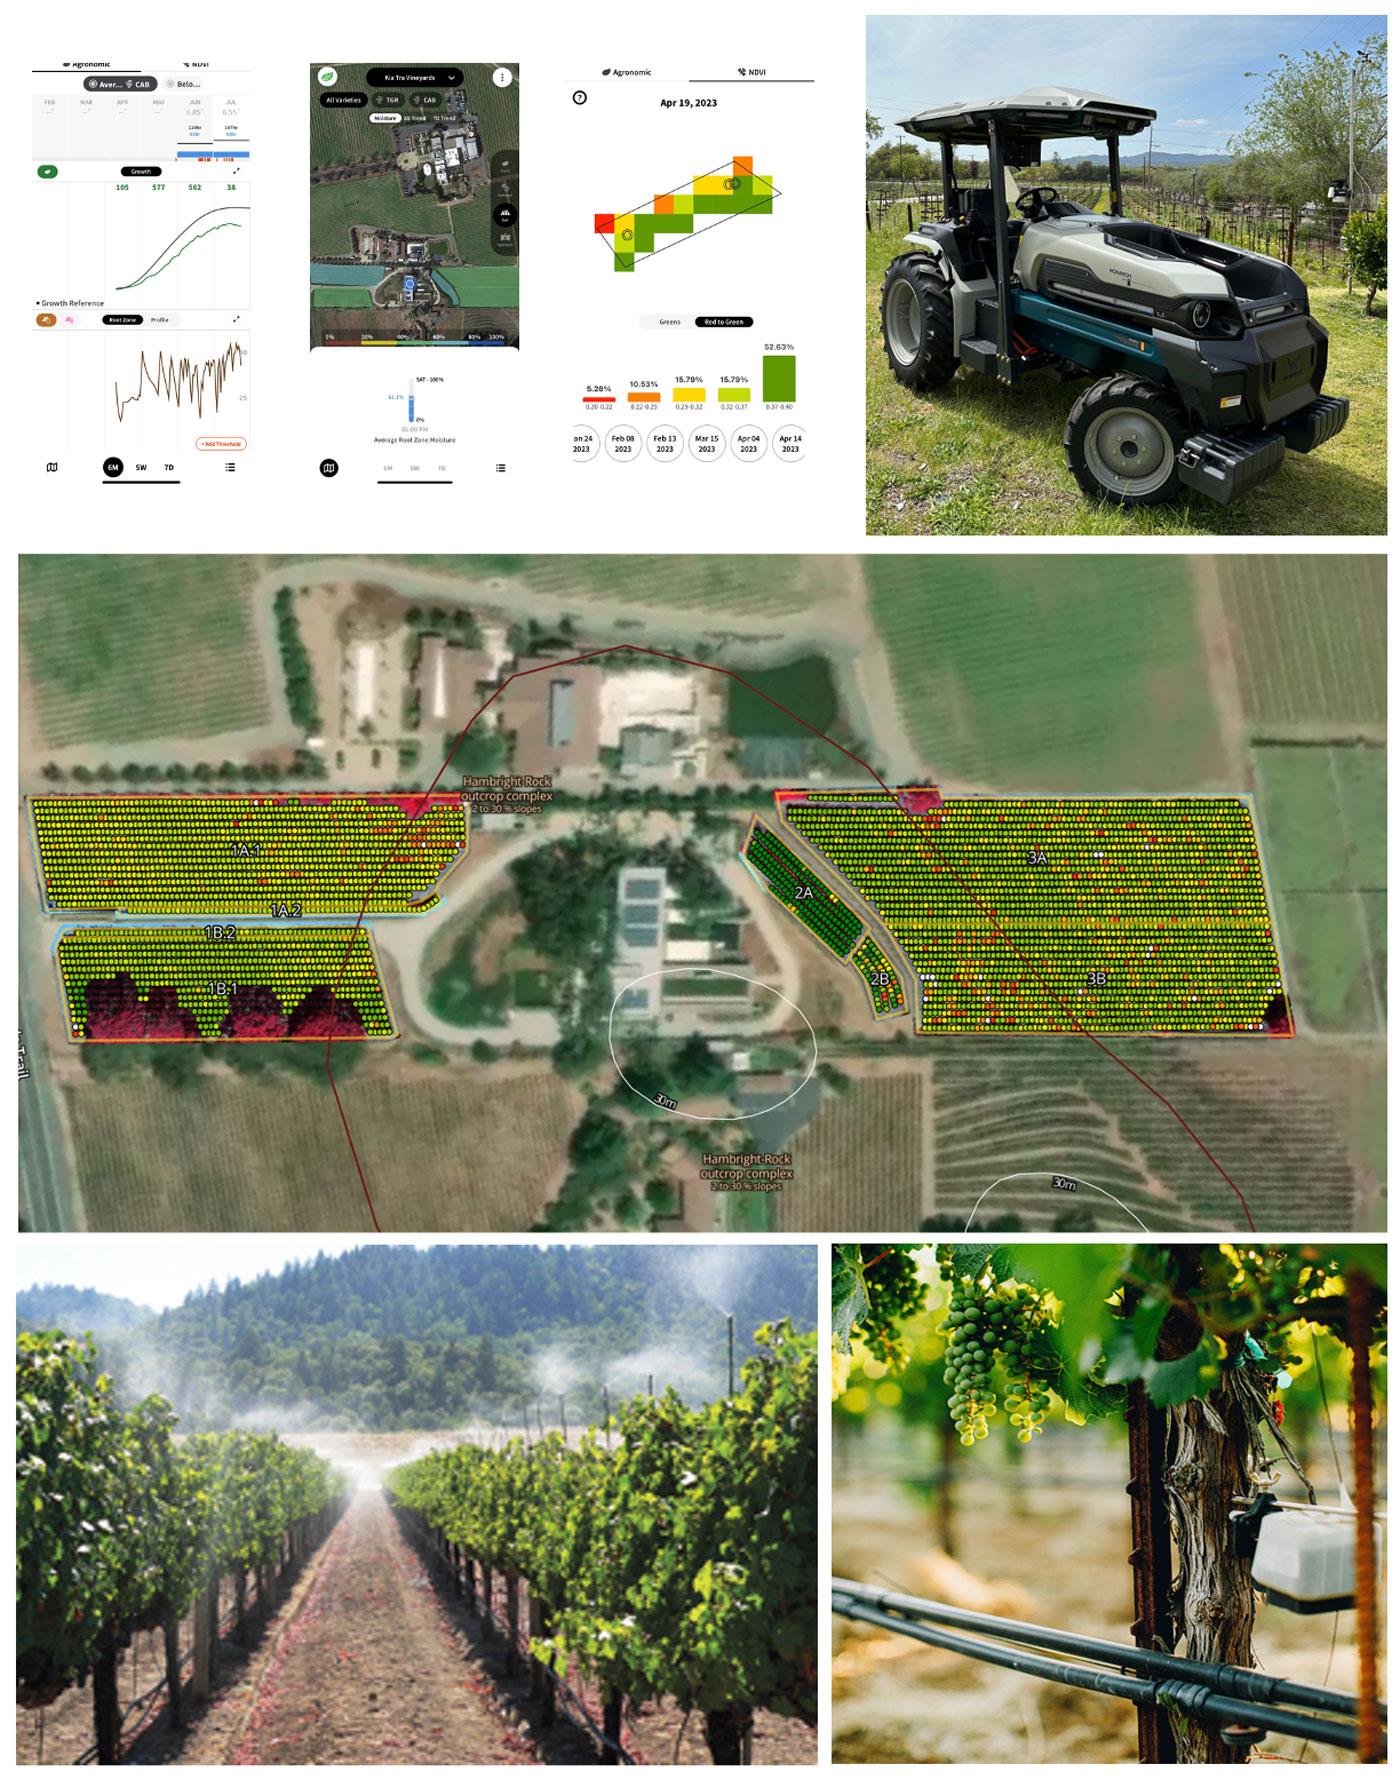 Collage of photos depicting the Neotempo SMART vineyard